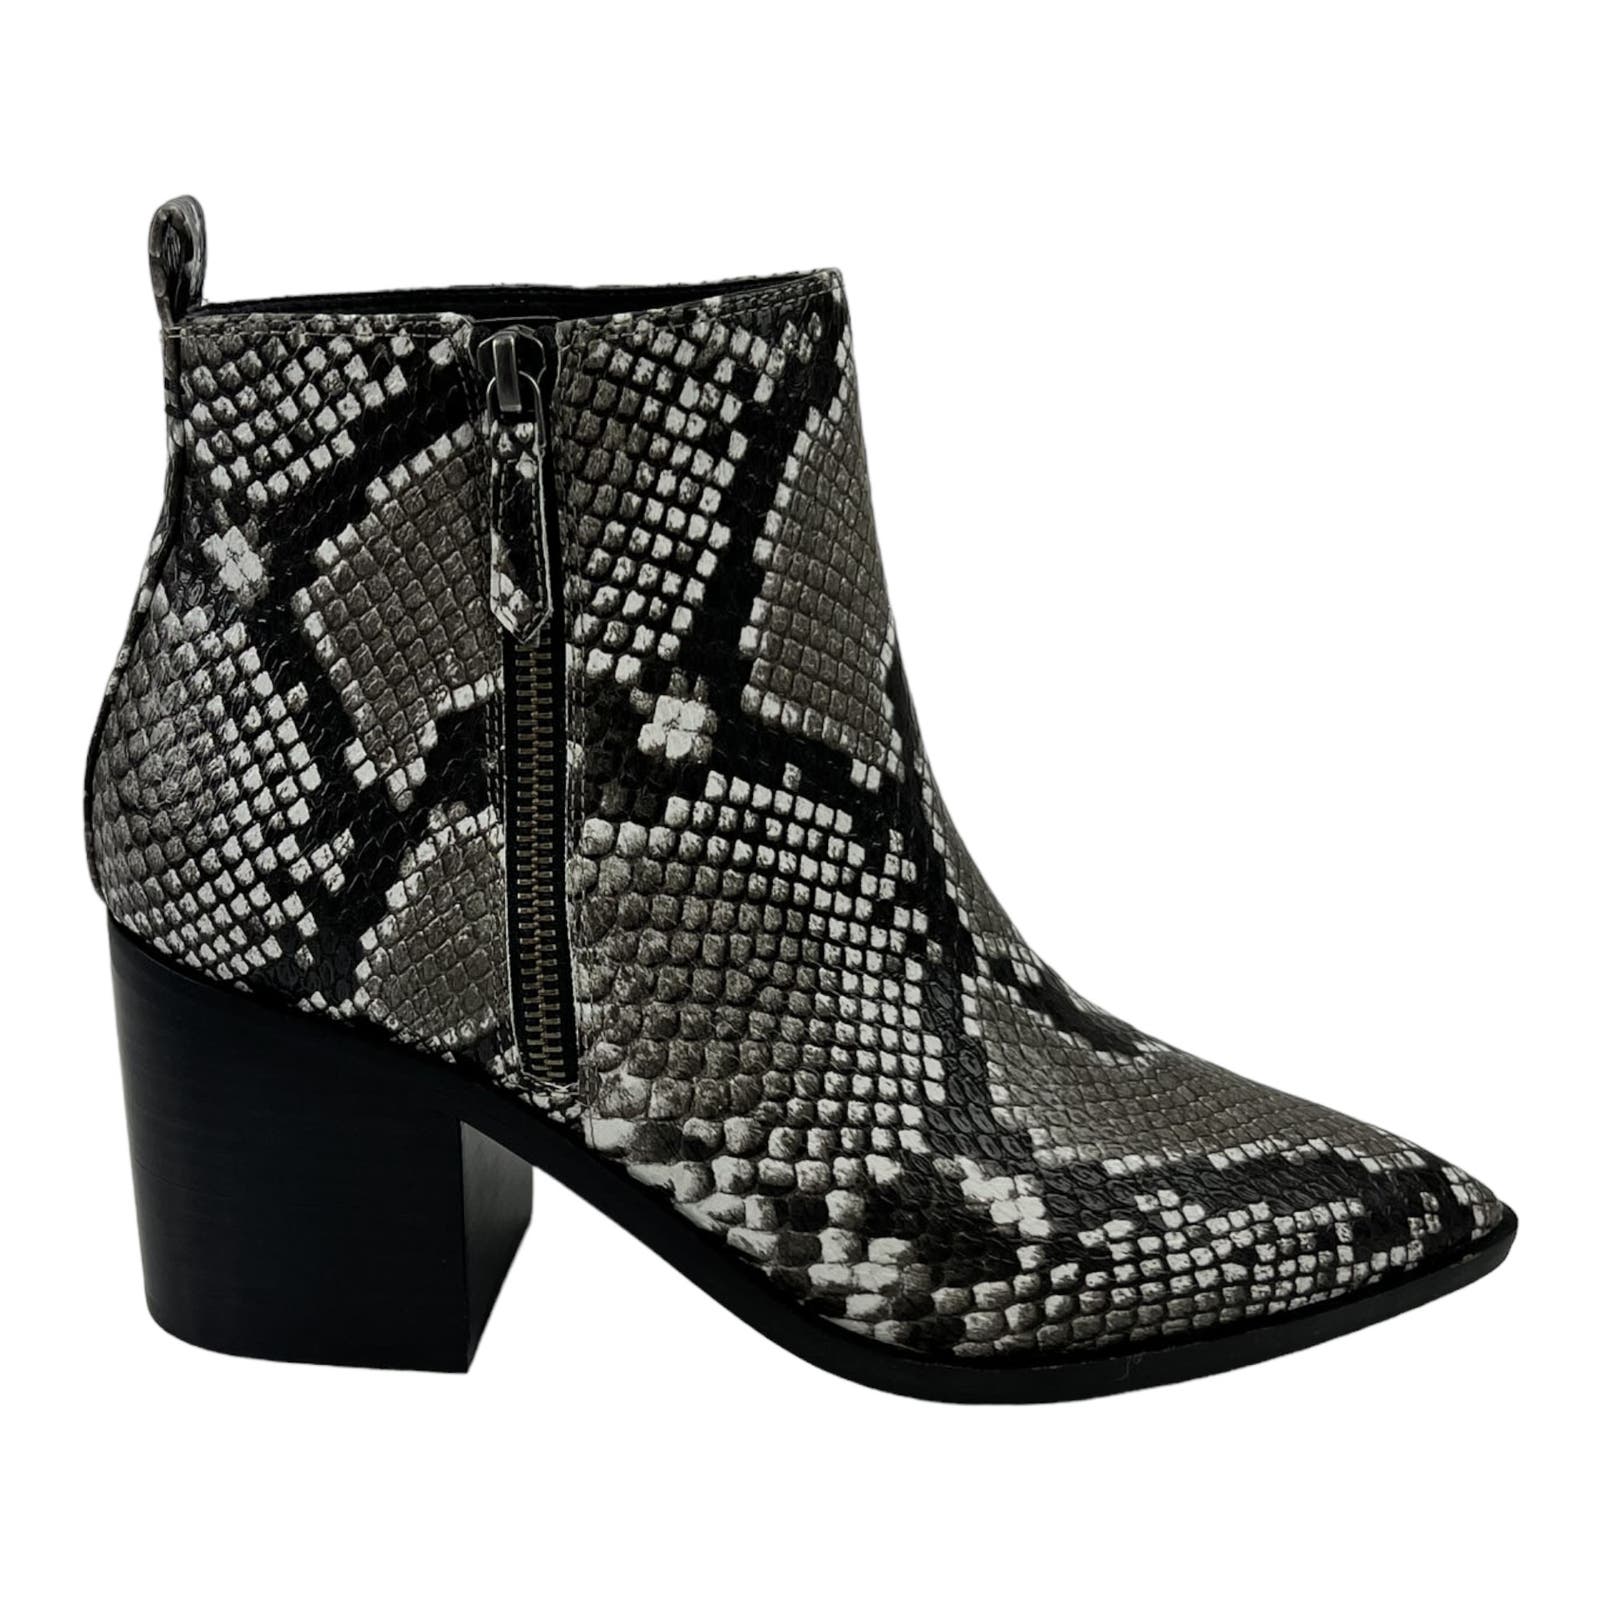 Treasure & Bond Women US 8 Pointed Toe Snake Print Ankle Boots Shoes